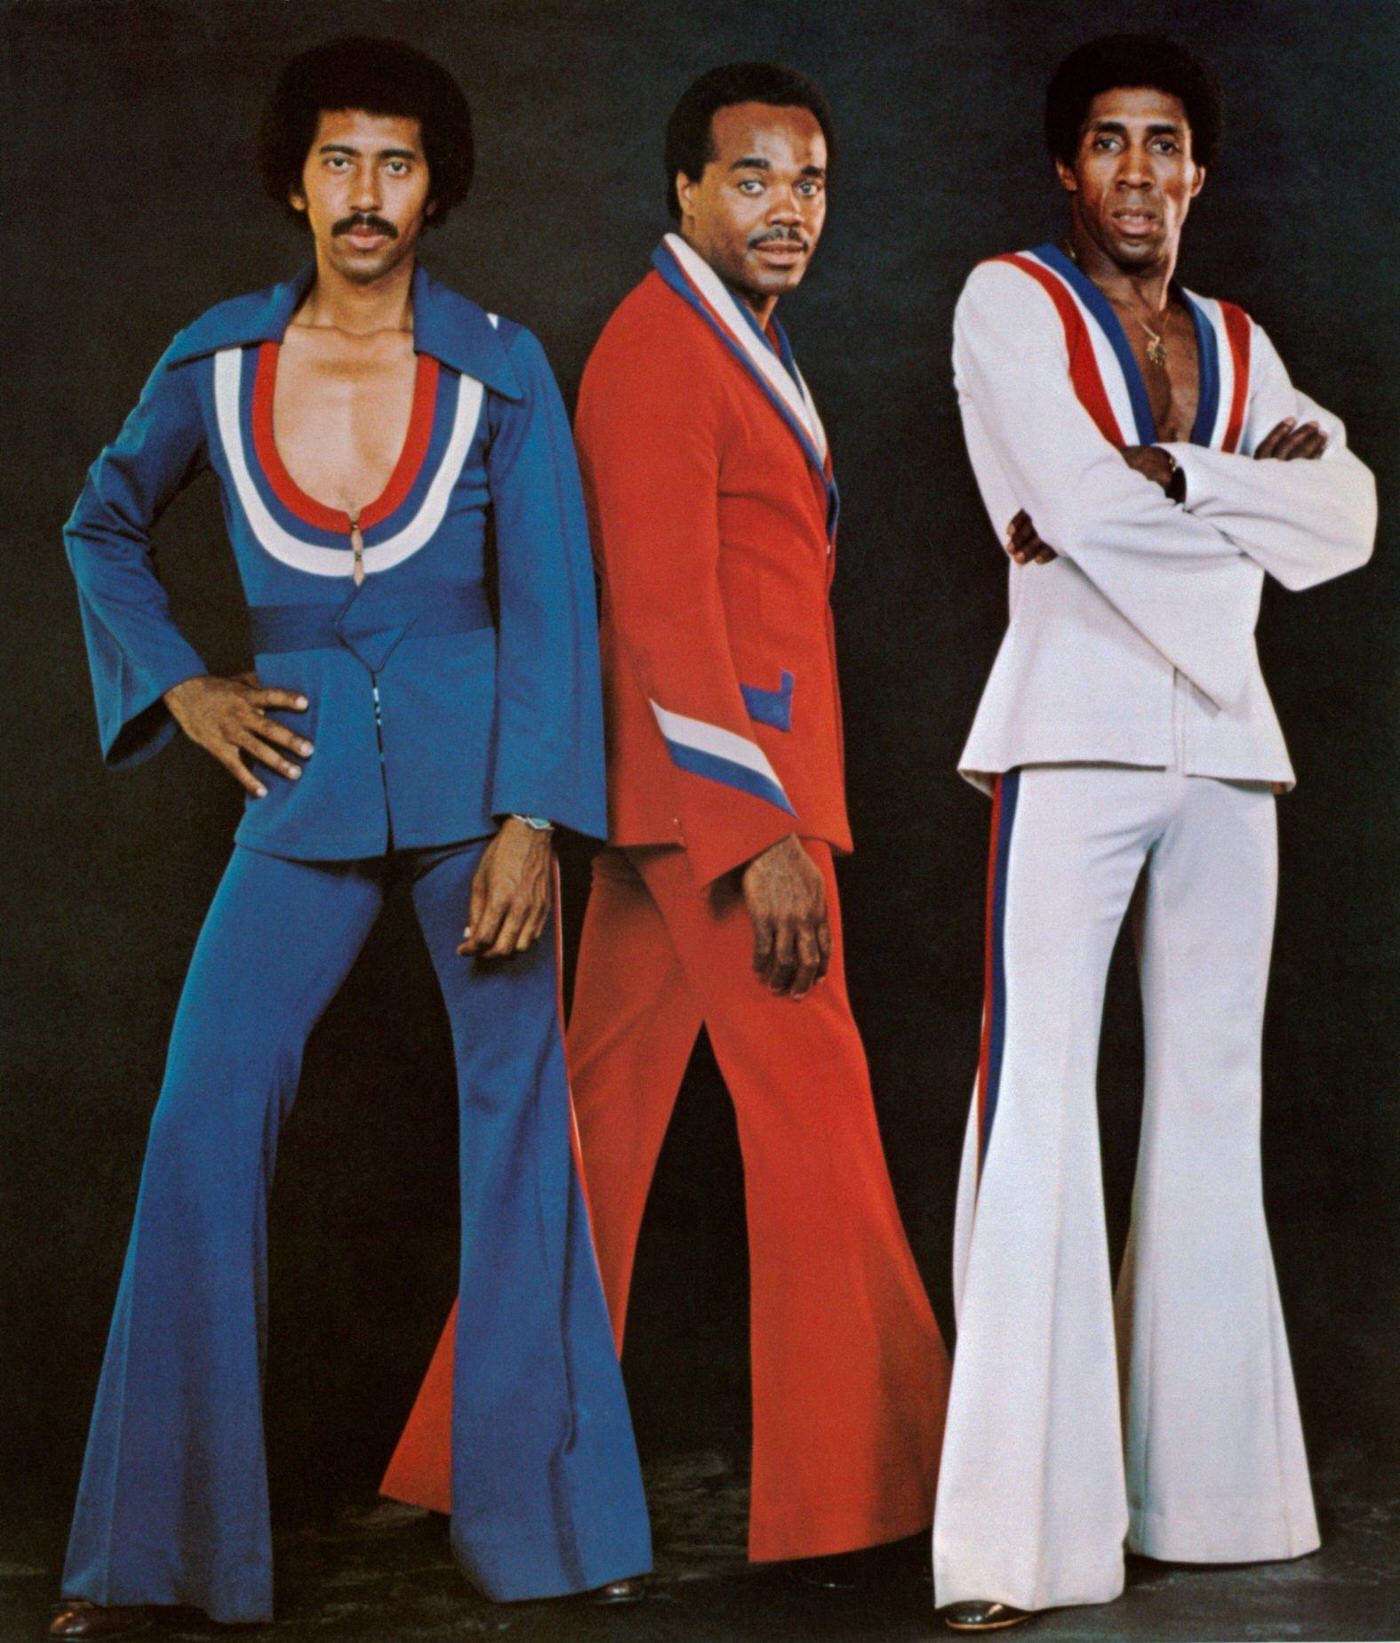 Bell Bottoms: The Groovy Style of the 70s